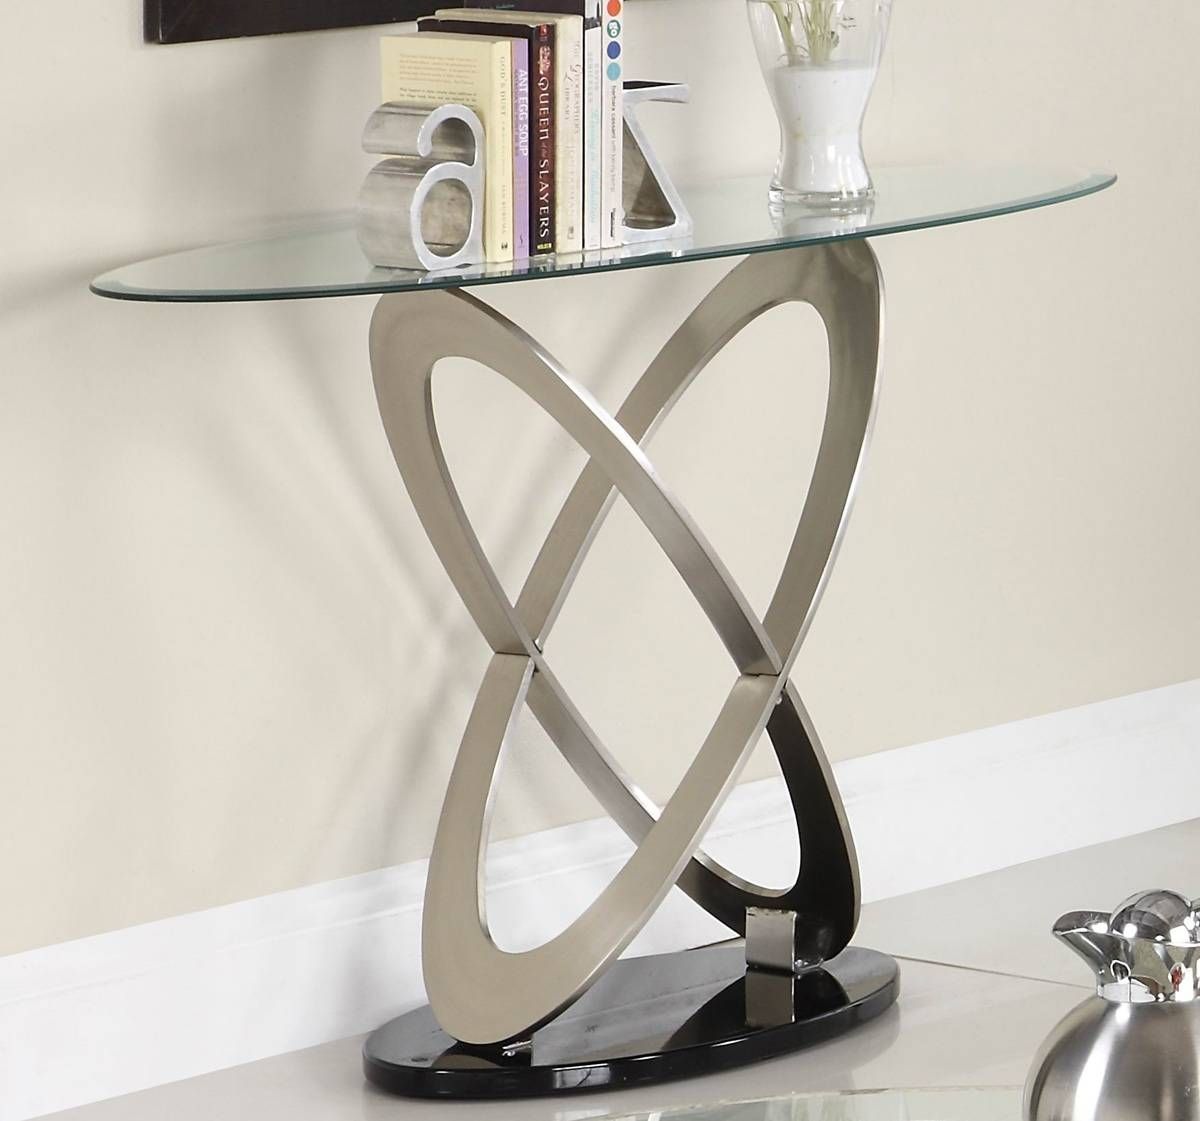 Homelegance Firth Oval Glass Sofa Table In Chrome & Black Metal Intended For Chrome Sofa Tables (View 3 of 15)